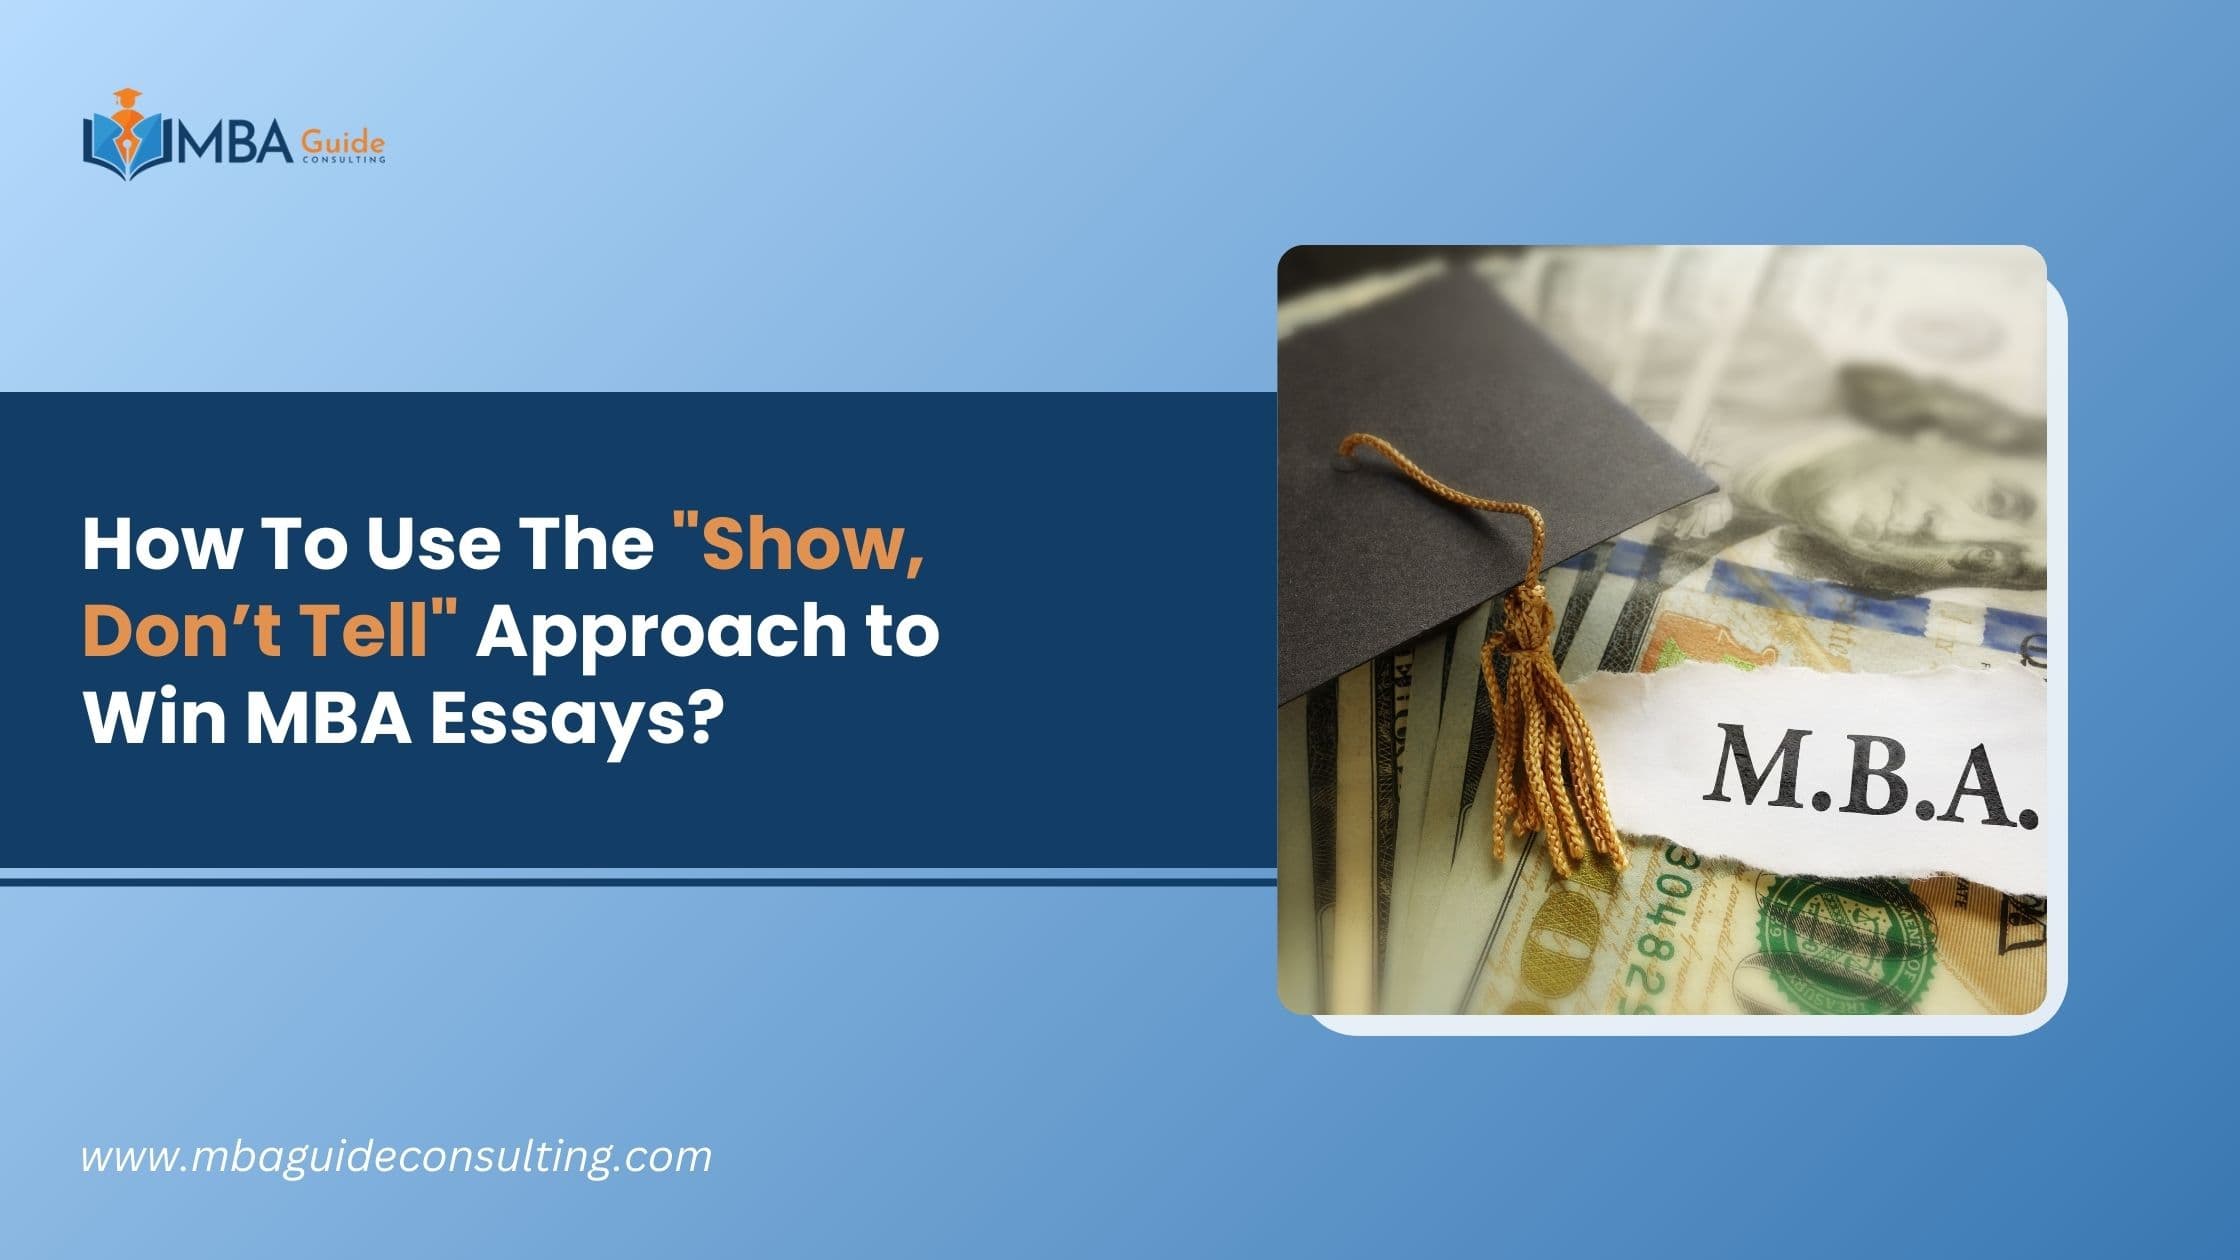 ­How To Use The “Show, Don’t Tell” Approach to Win MBA Essays?